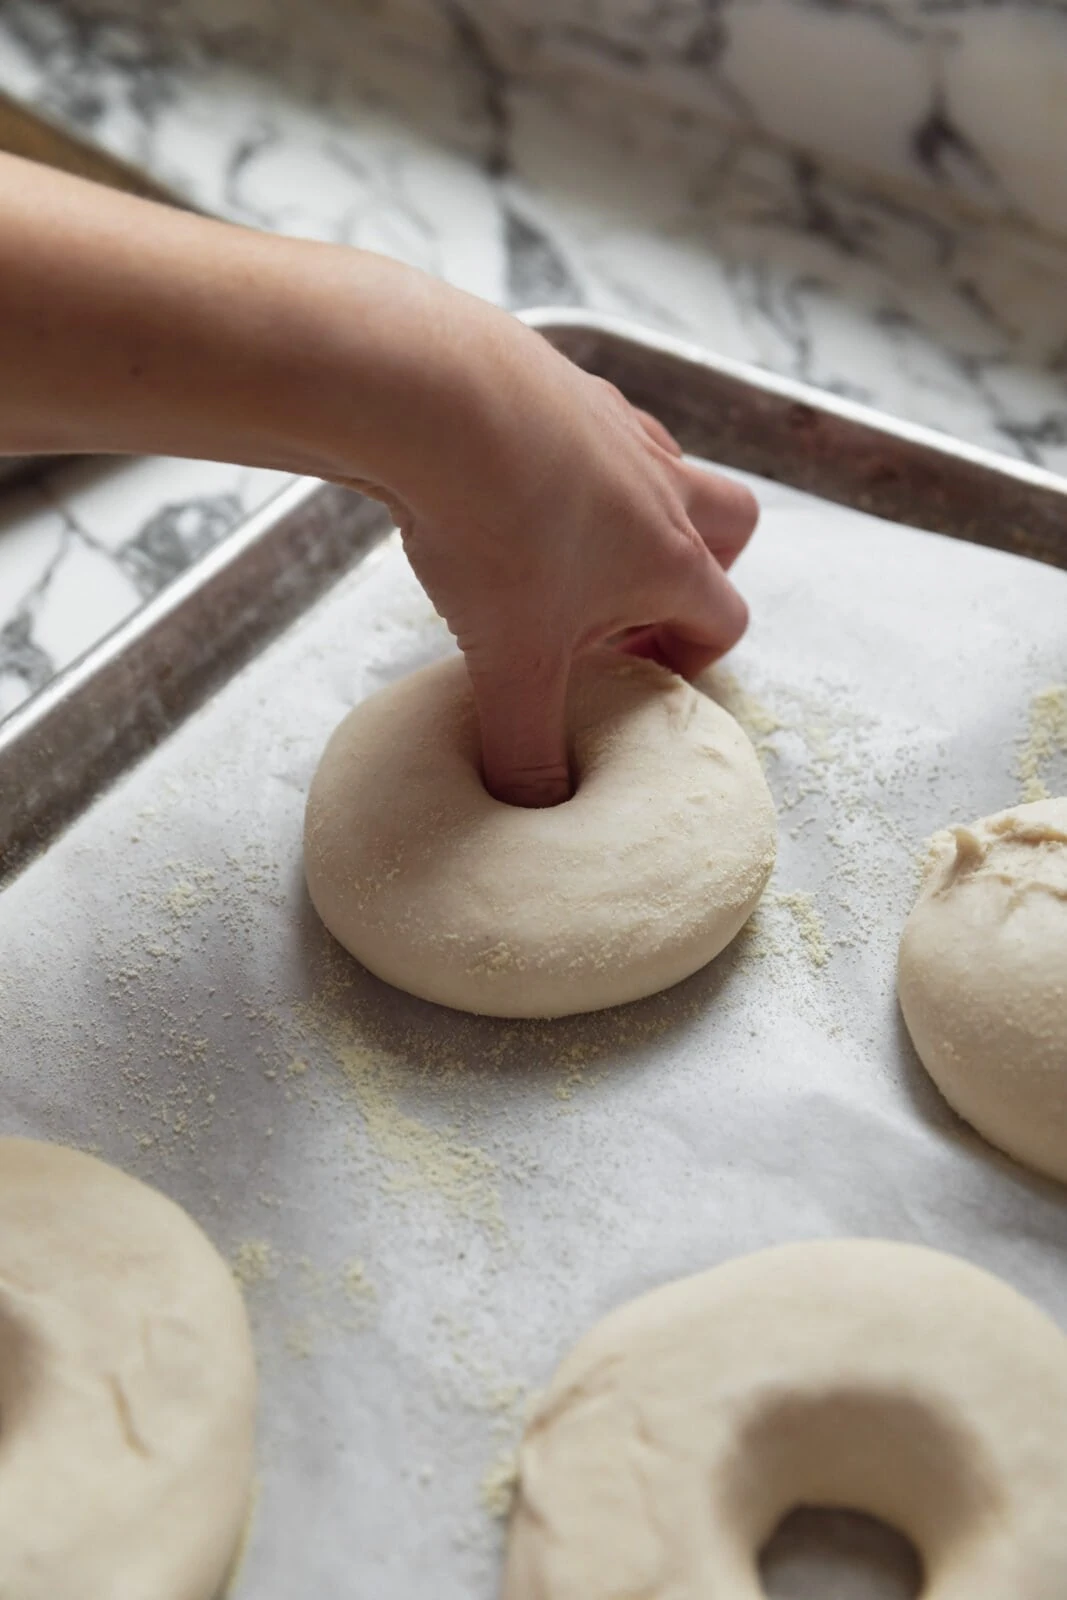 make an indent in the bagel dough balls